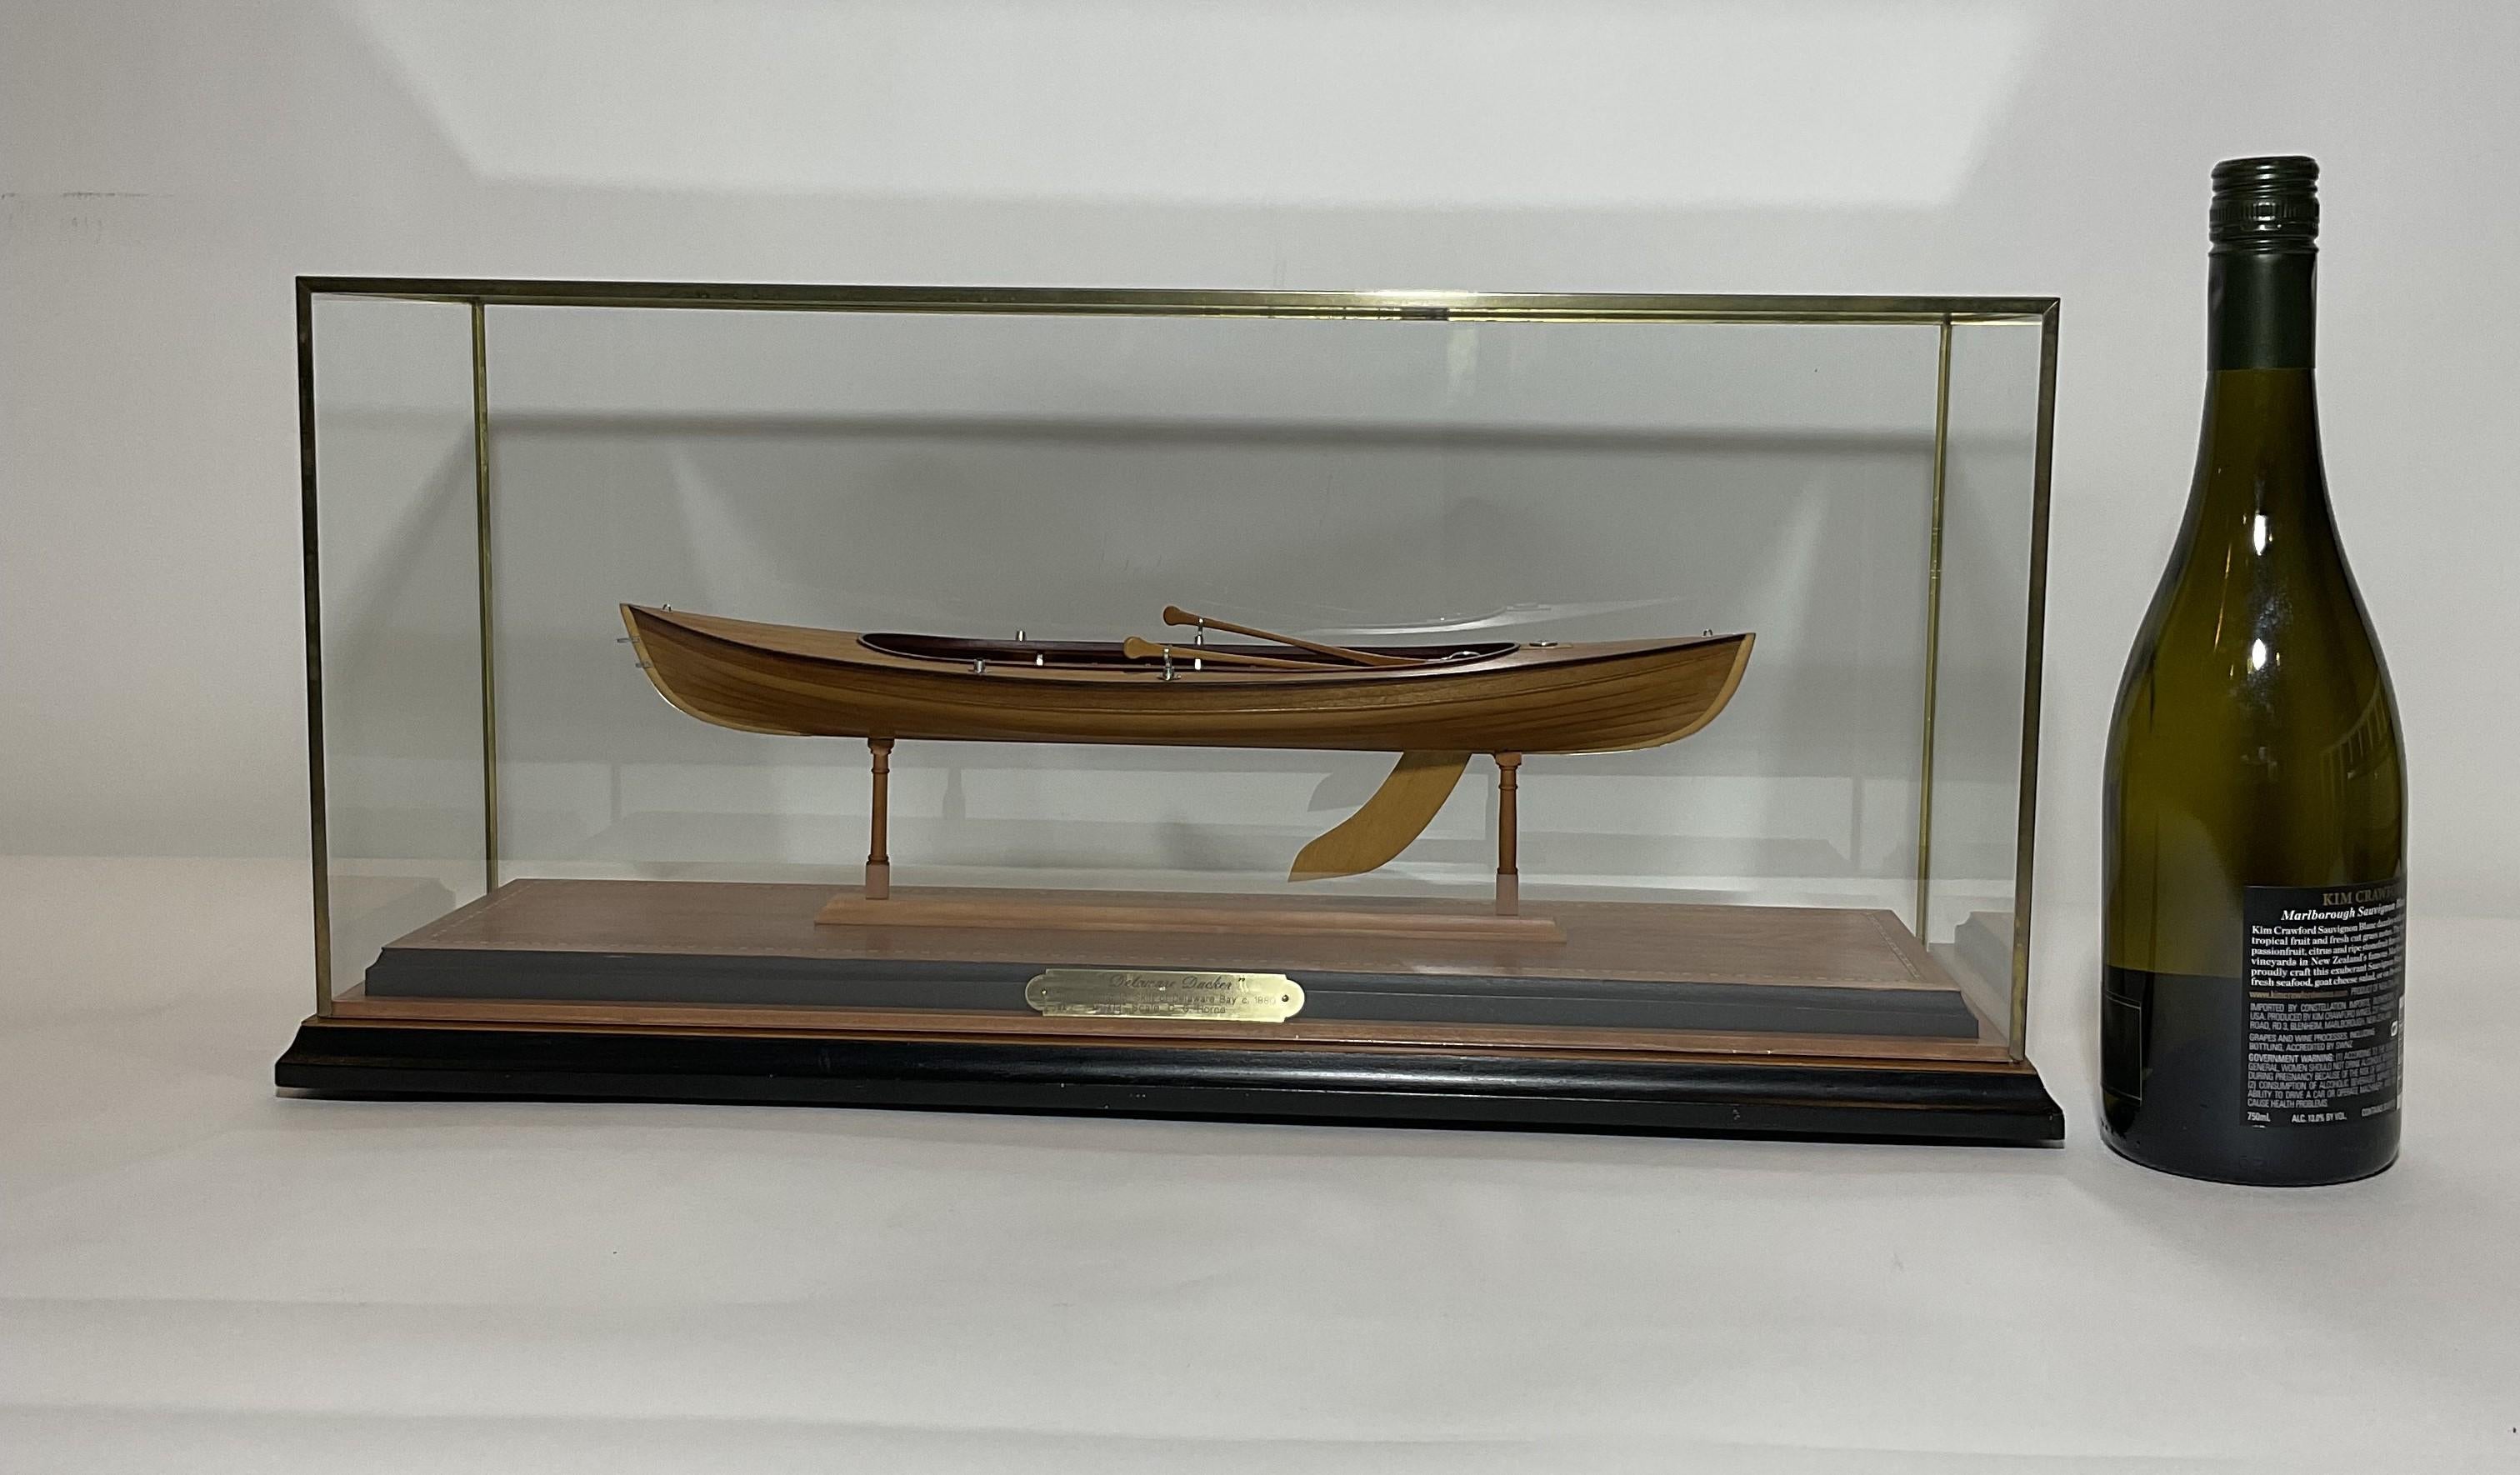 Superbly crafted model of a Delaware Ducker by C.G. Horne. Planked and pinned hull with floorboards, paddles, etc.. Mounted into an inlaid case.

Weight: 9 lbs.
Overall Dimensions: 10